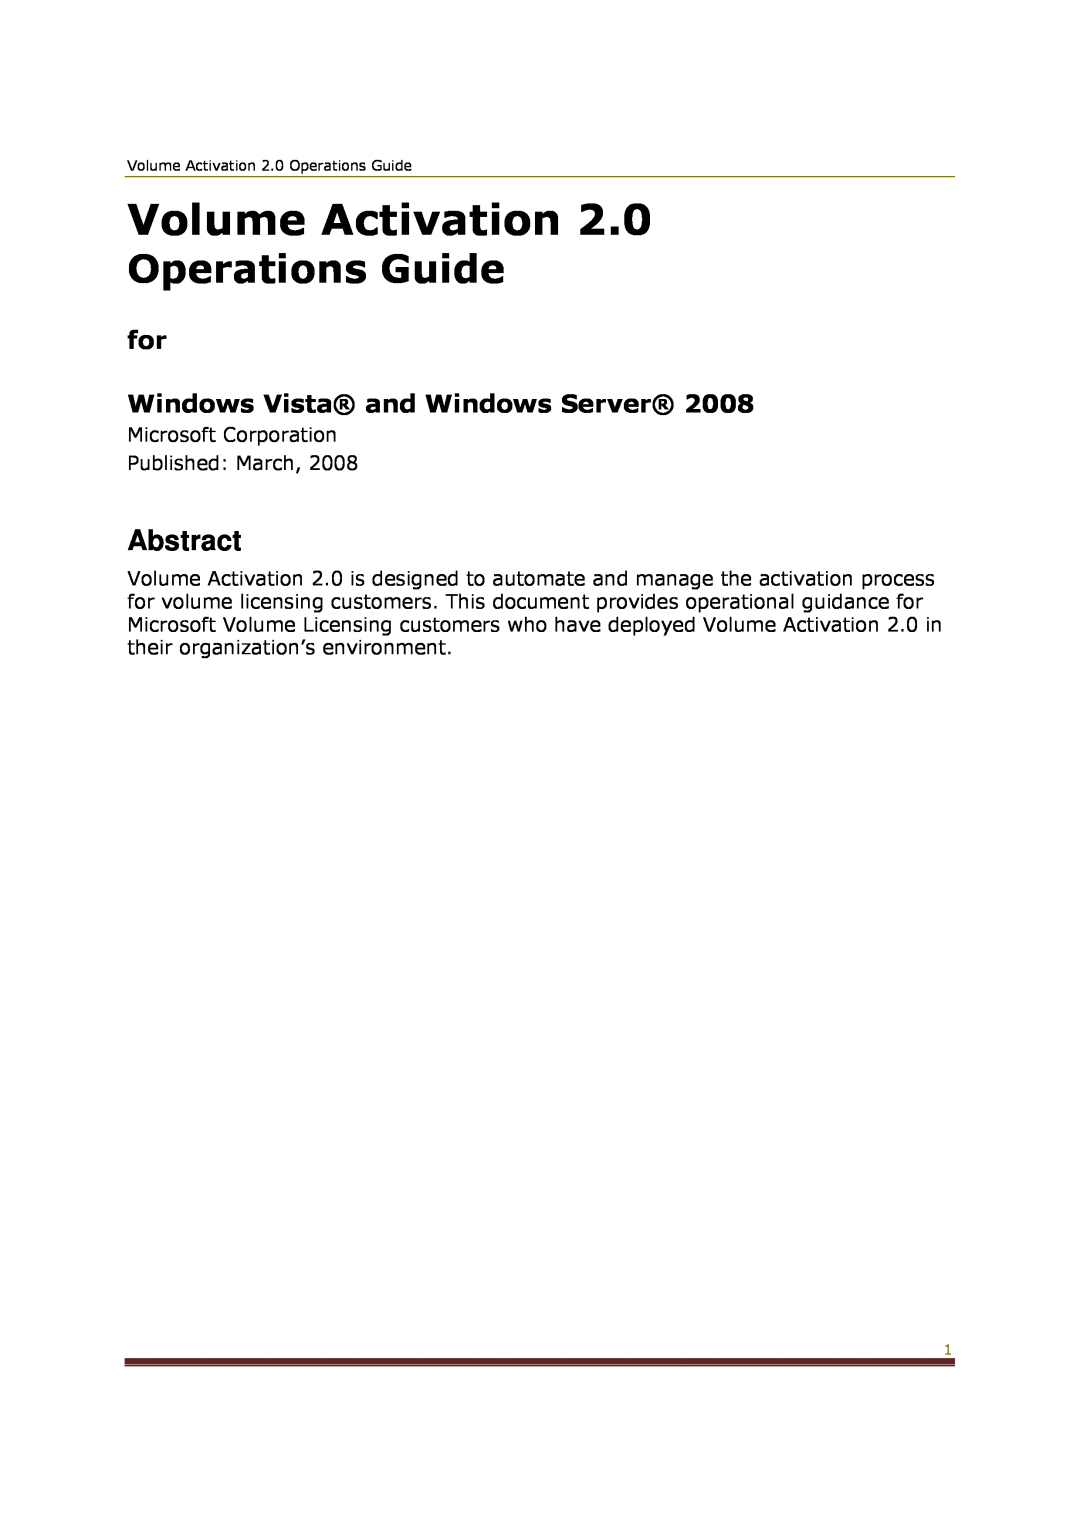 Microsoft 2 manual Abstract, for Windows Vista and Windows Server, Volume Activation, Operations Guide 